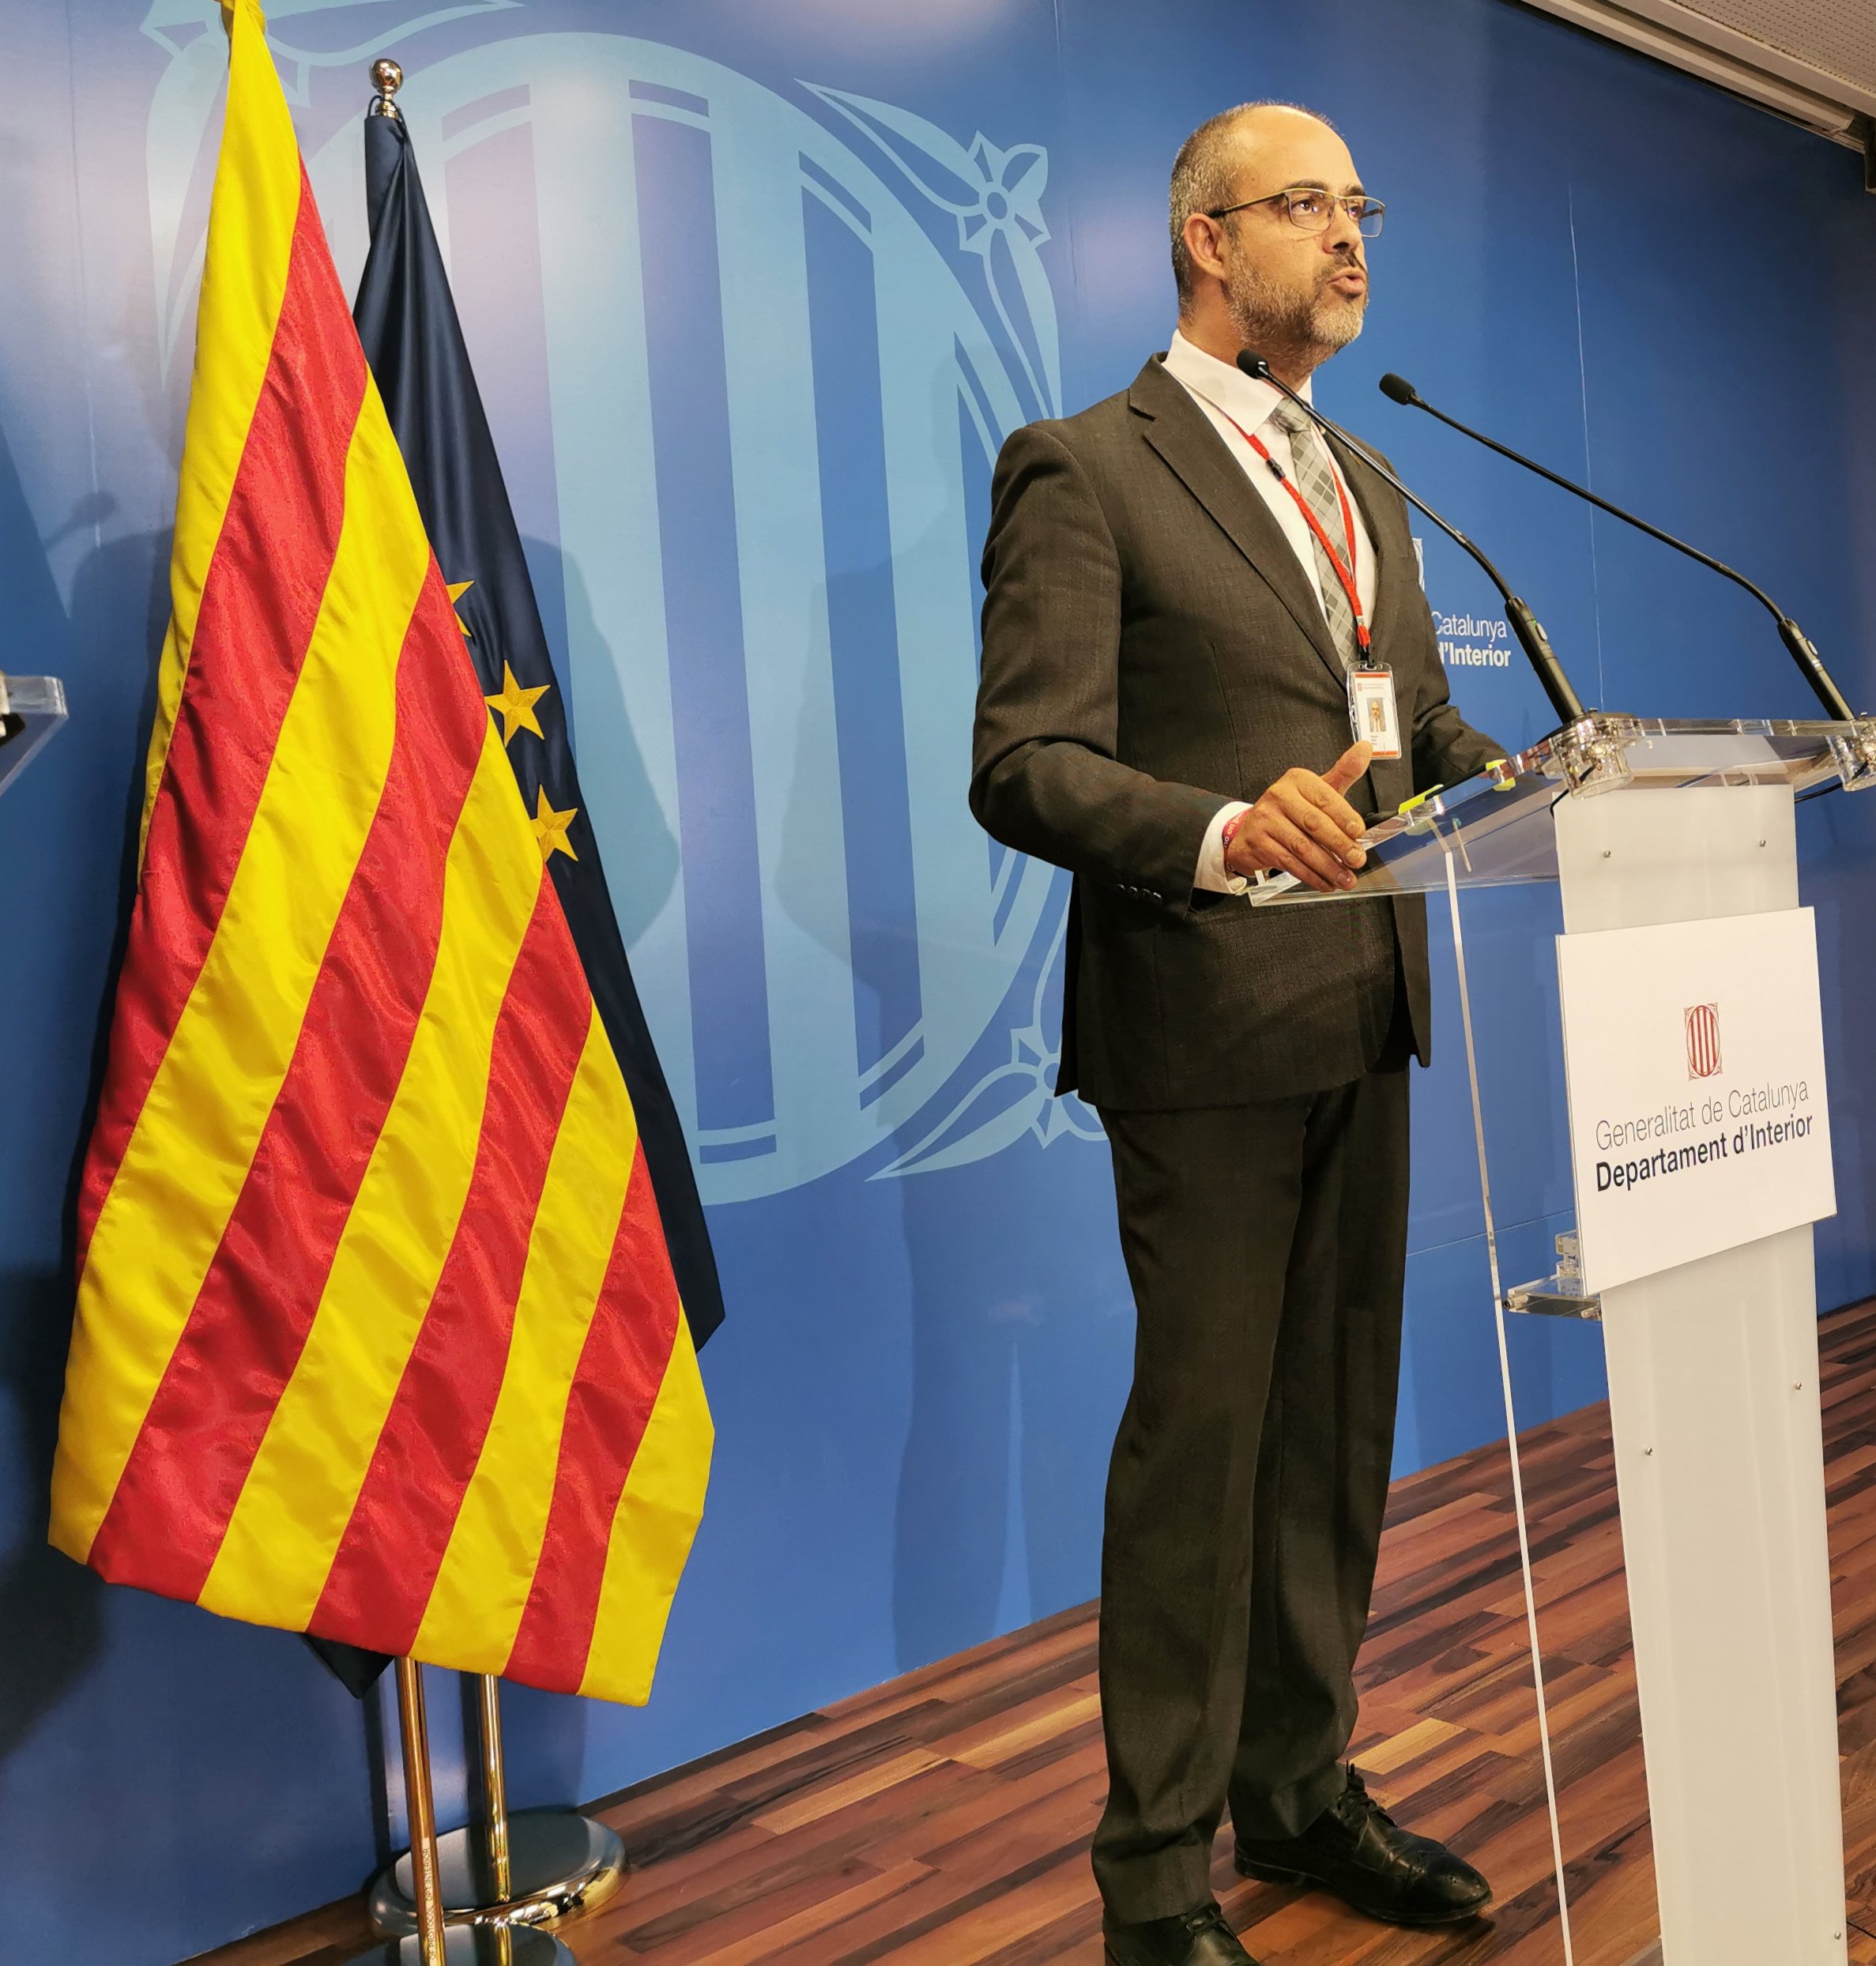 Catalan police are clamping down on Easter trips to second homes, says minister